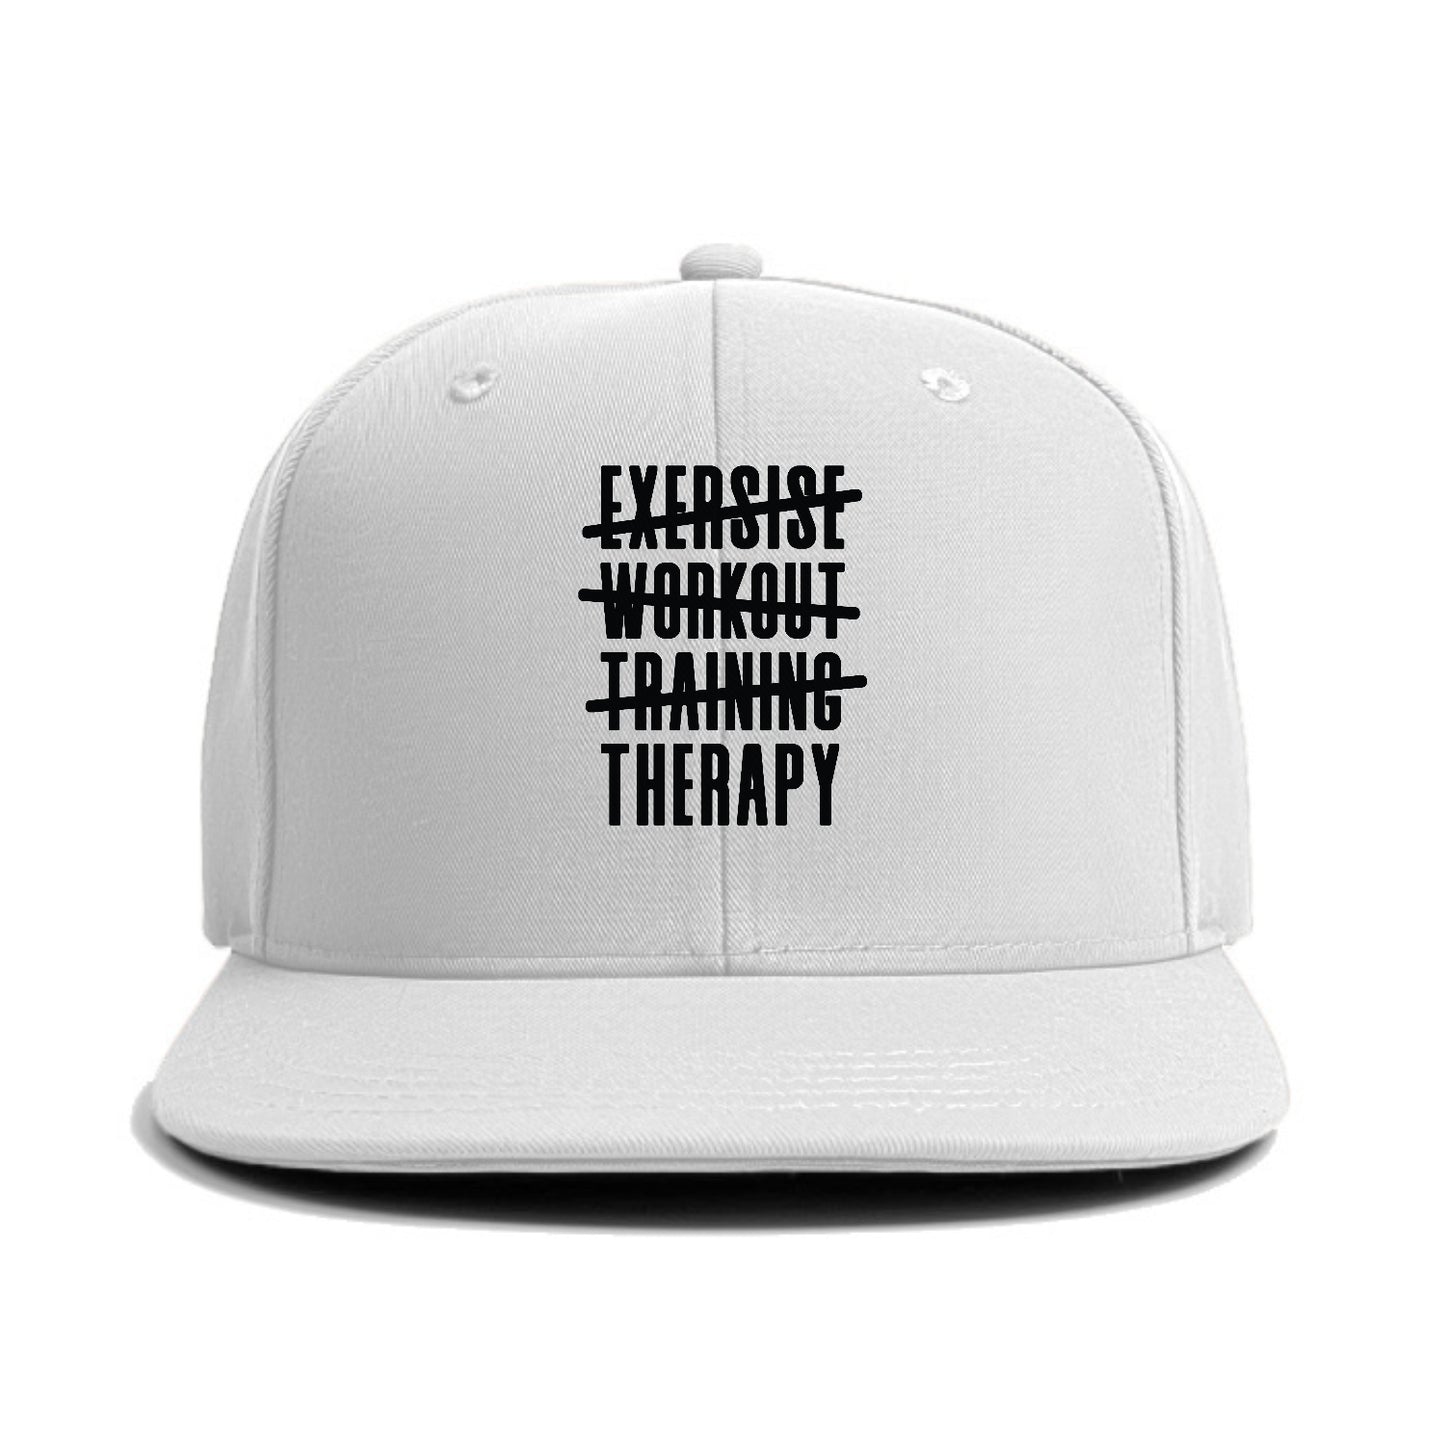 Exercise Workout Training Therapy Hat